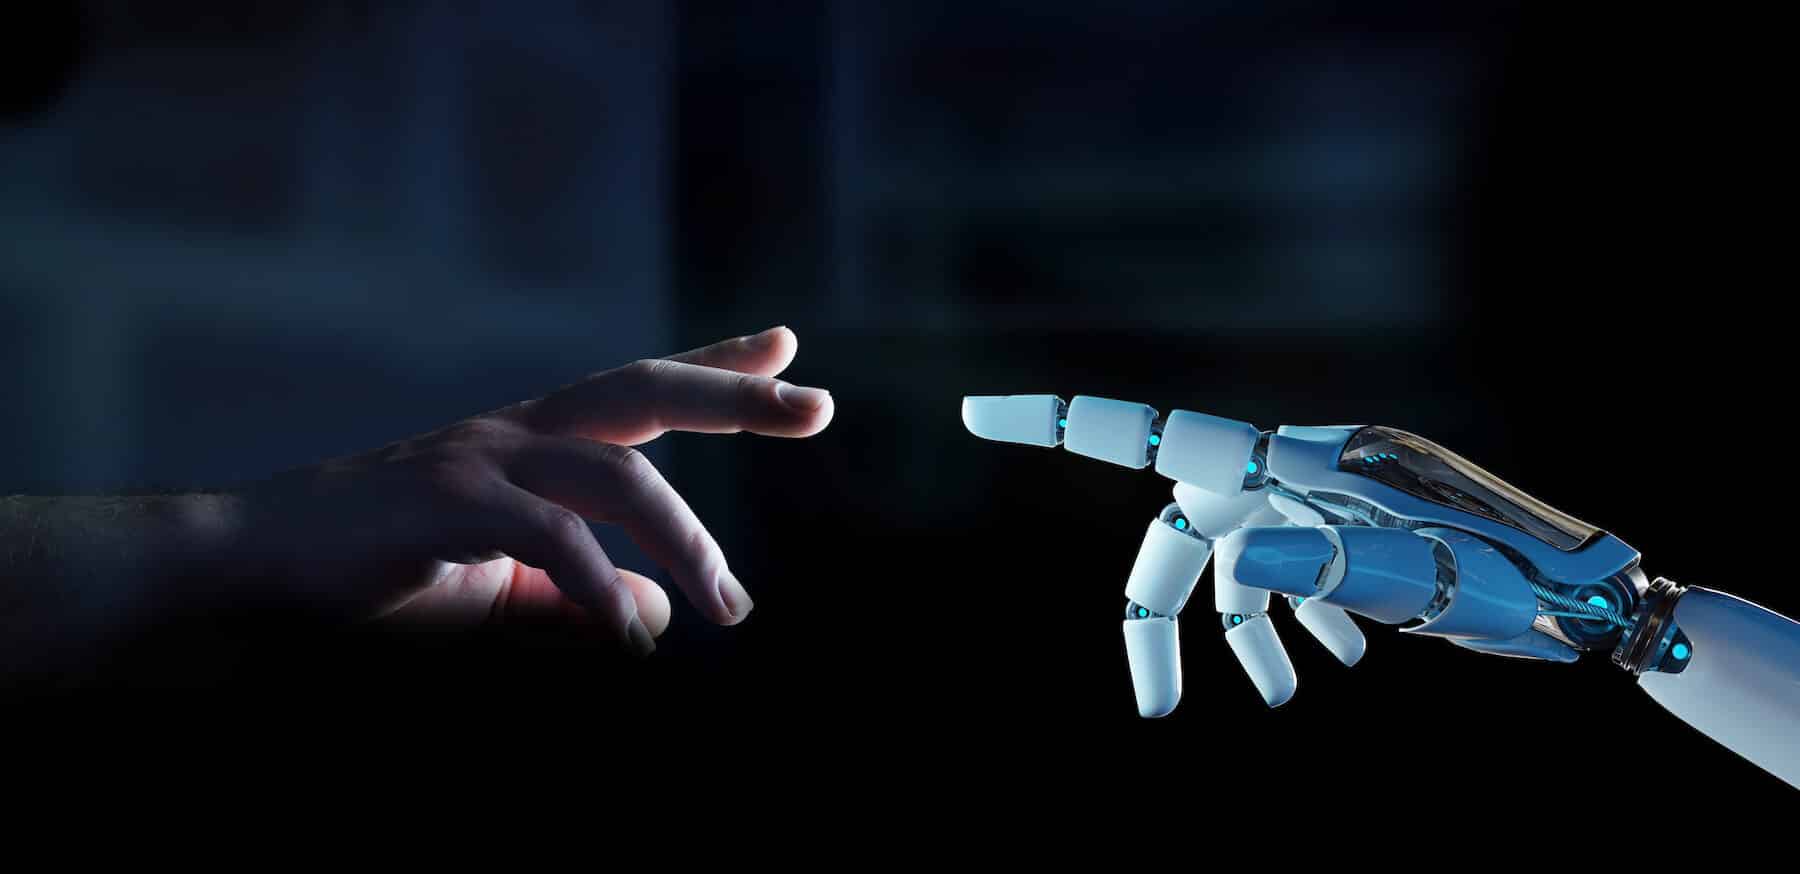 Human hand reaching out to a robot / ai hand - future technology